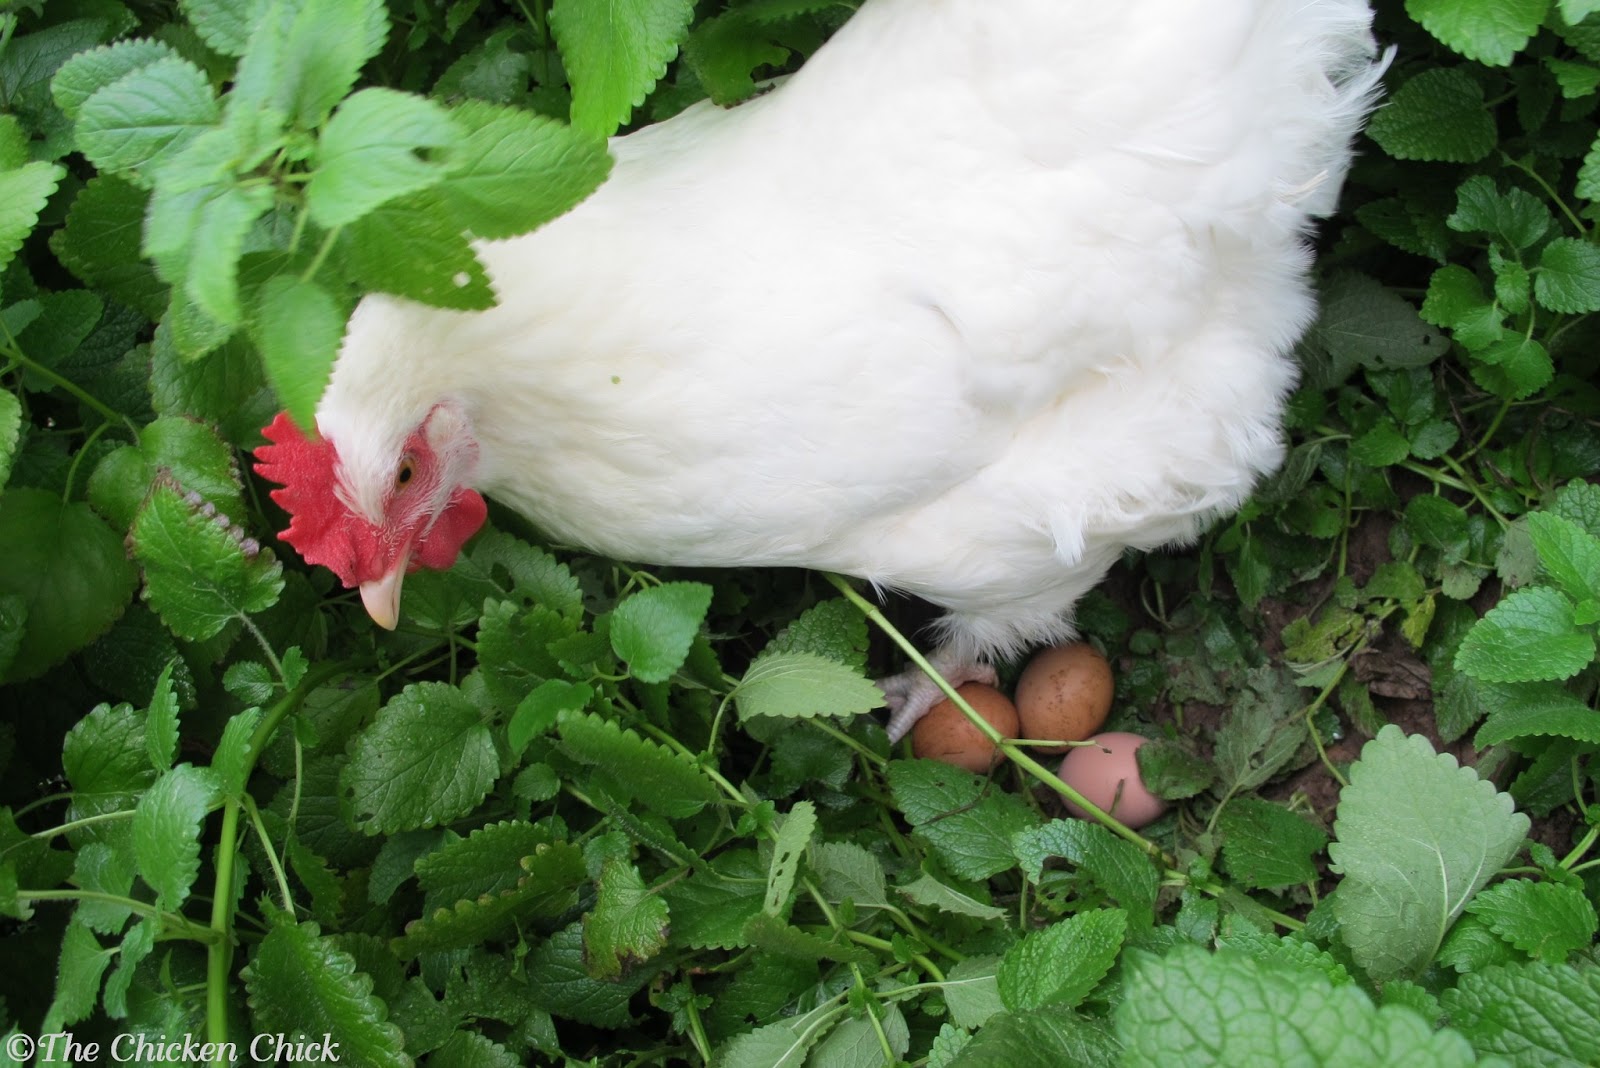 The Chicken Chick 8 Tips For CLEAN EGGS From Backyard Chickens